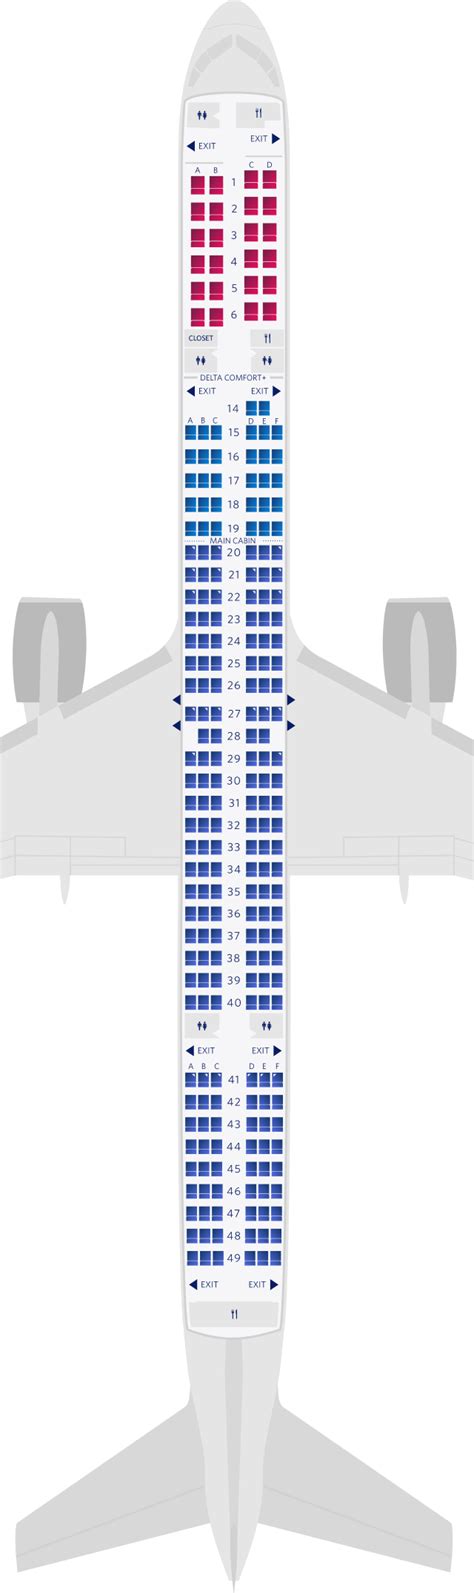 United 757-300 seat map. For your next United flight, use this seating chart to get the most comfortable seats, legroom, and recline on . Seat Maps; Airlines; Cheap Flights; Comparison Charts ... Boeing 757-300 (753) Boeing 767-300ER (76A) Layout 1; Boeing 767-300ER (76C) Layout 3; Boeing 767-300ER (76L) Layout 2; Boeing 767-400ER (764) 